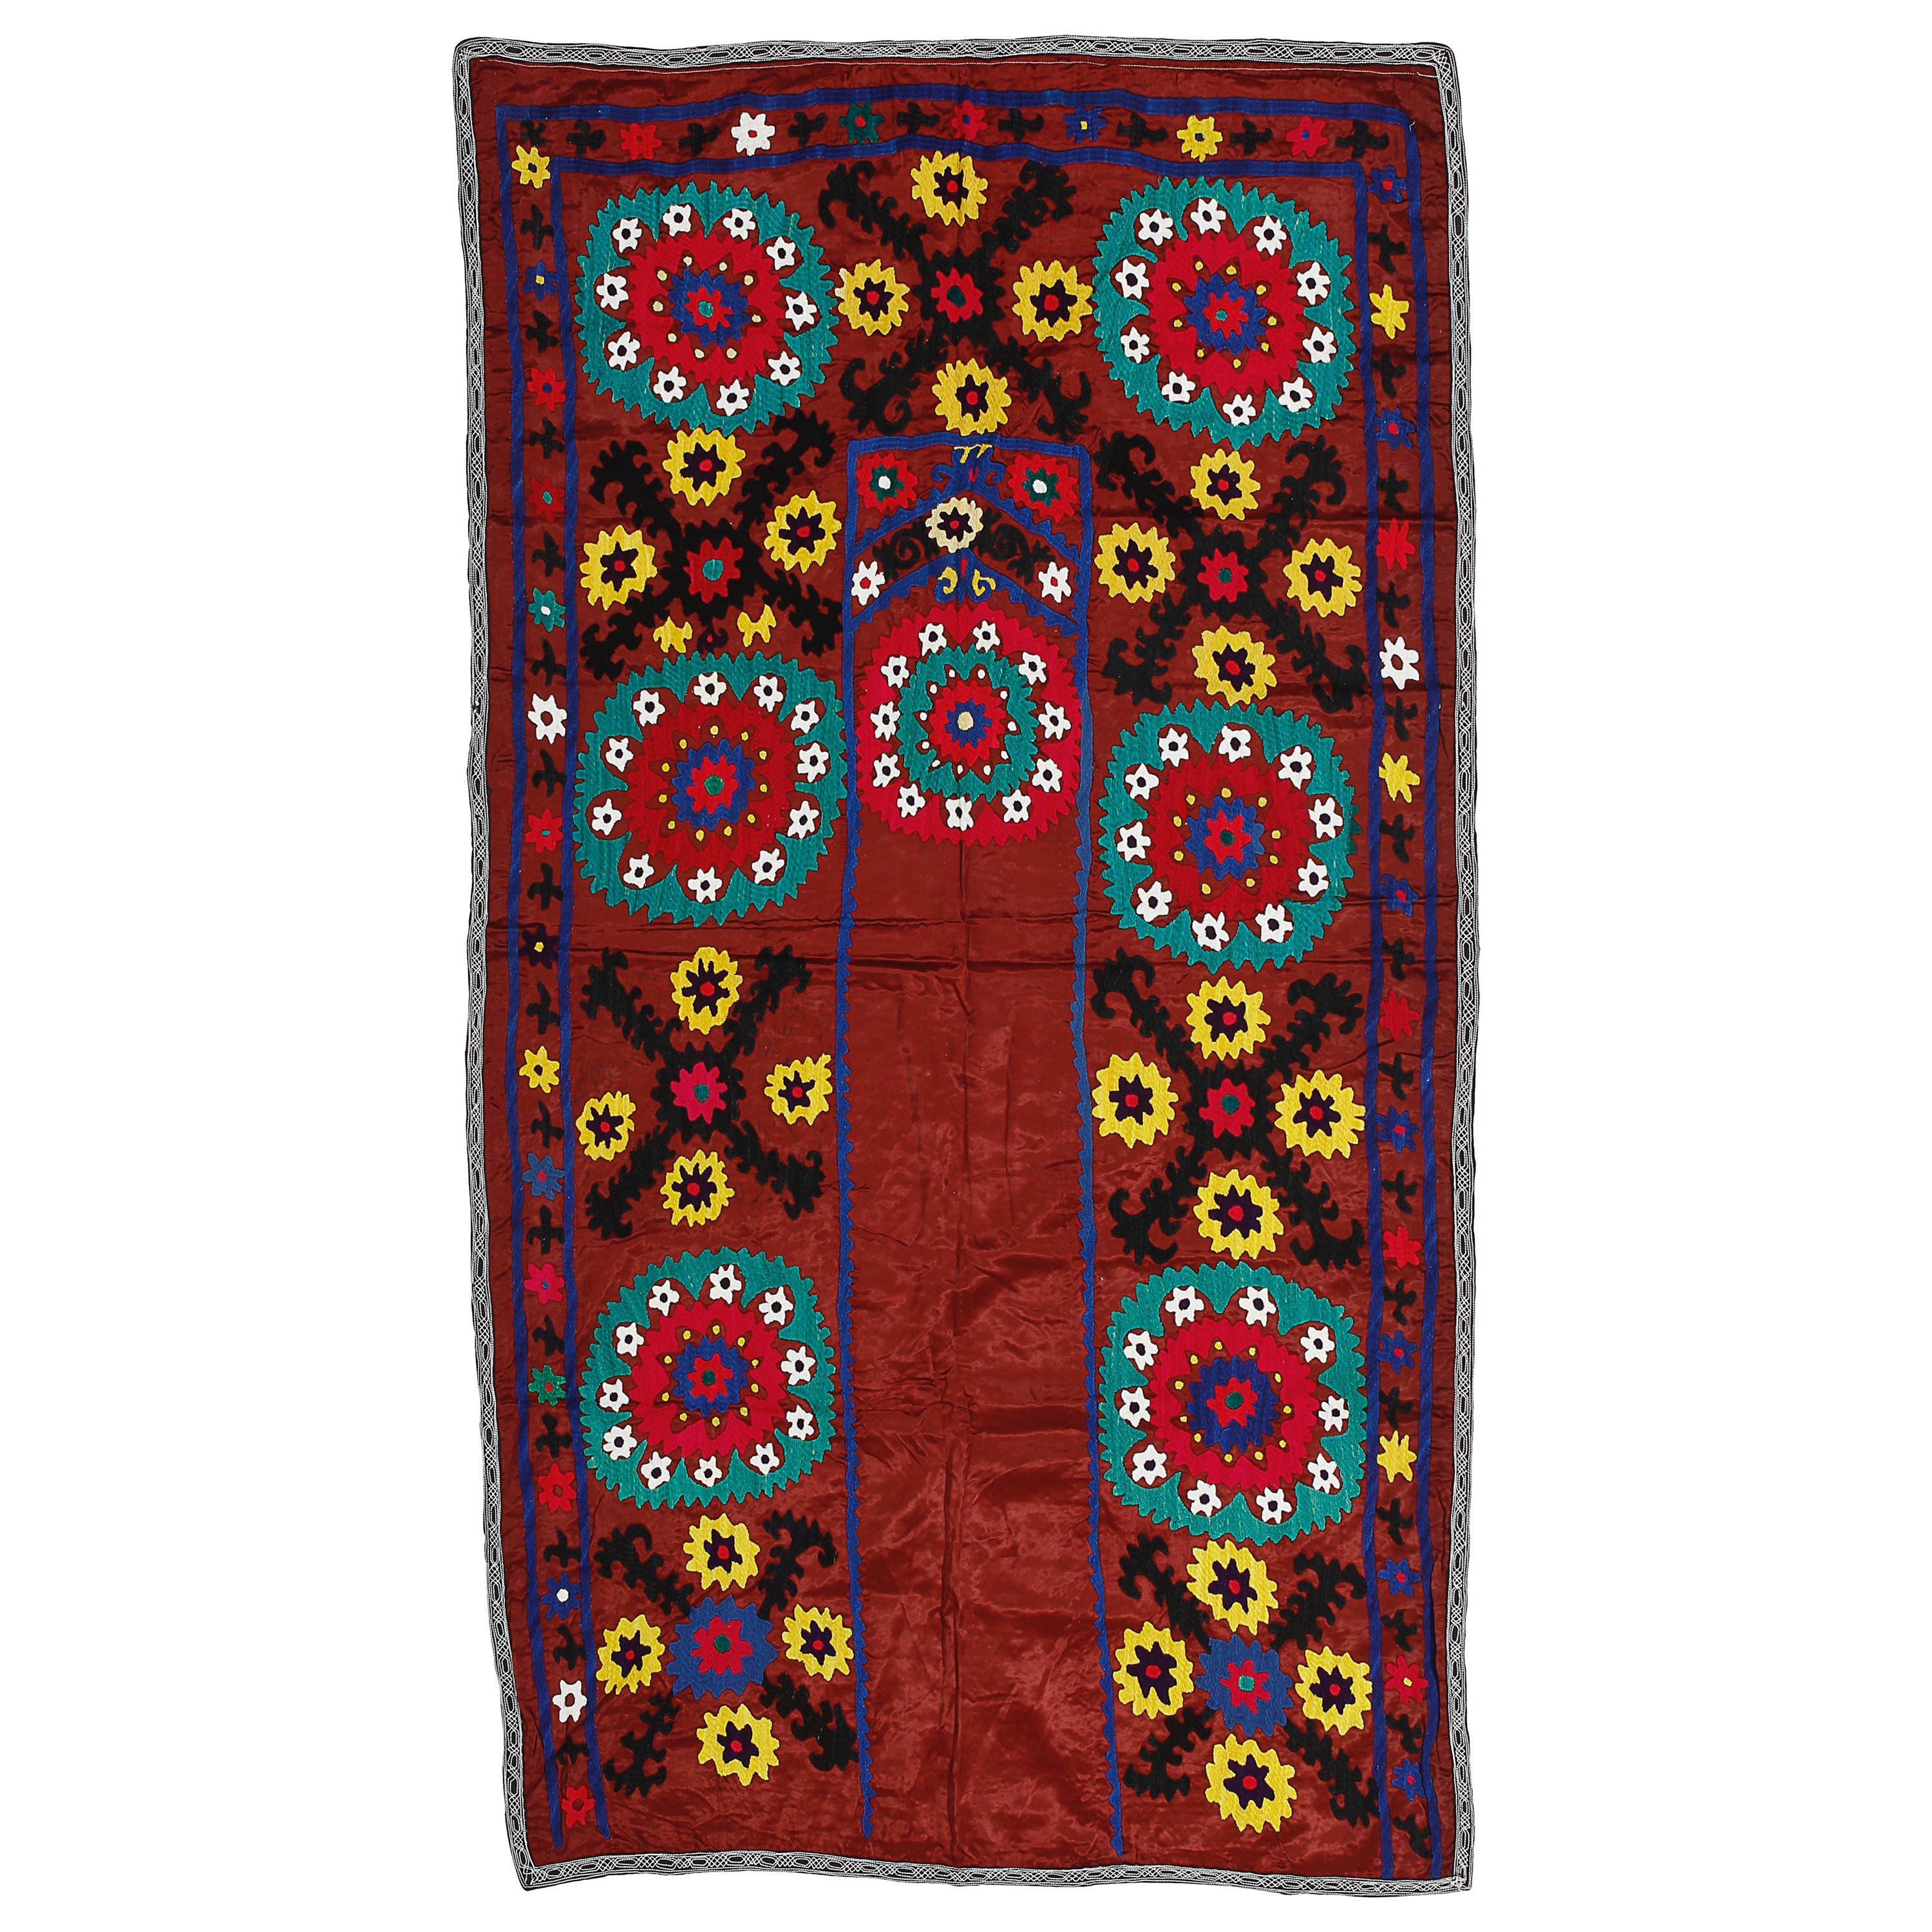 3.3x5.8 ft Silk Hand Embroidered Vintage Uzbek Suzani Wall Hanging in Maroon Red